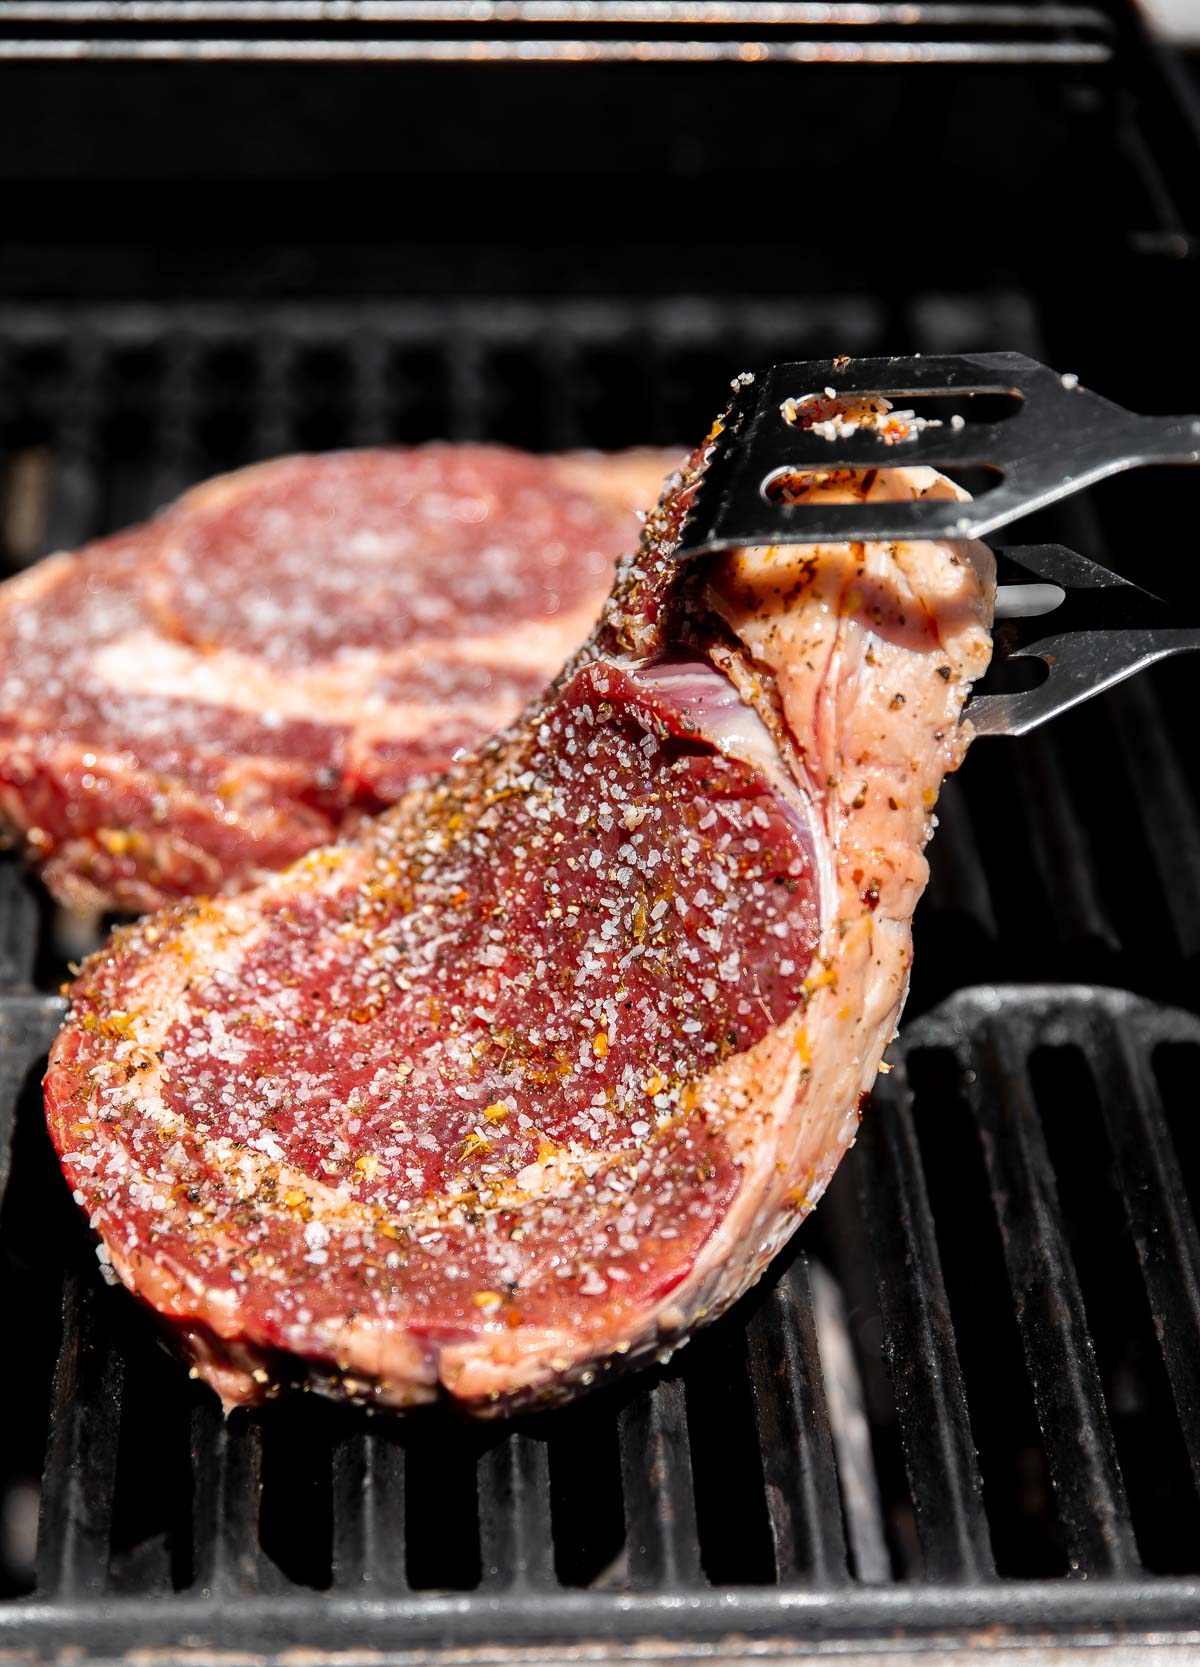 Two Tuscan steaks grill atop gas grill grates. The Tuscan style steak in the foreground is being placed on the grill with a pair of metal grill tongs while the steak in the background already lies flat on the grill.